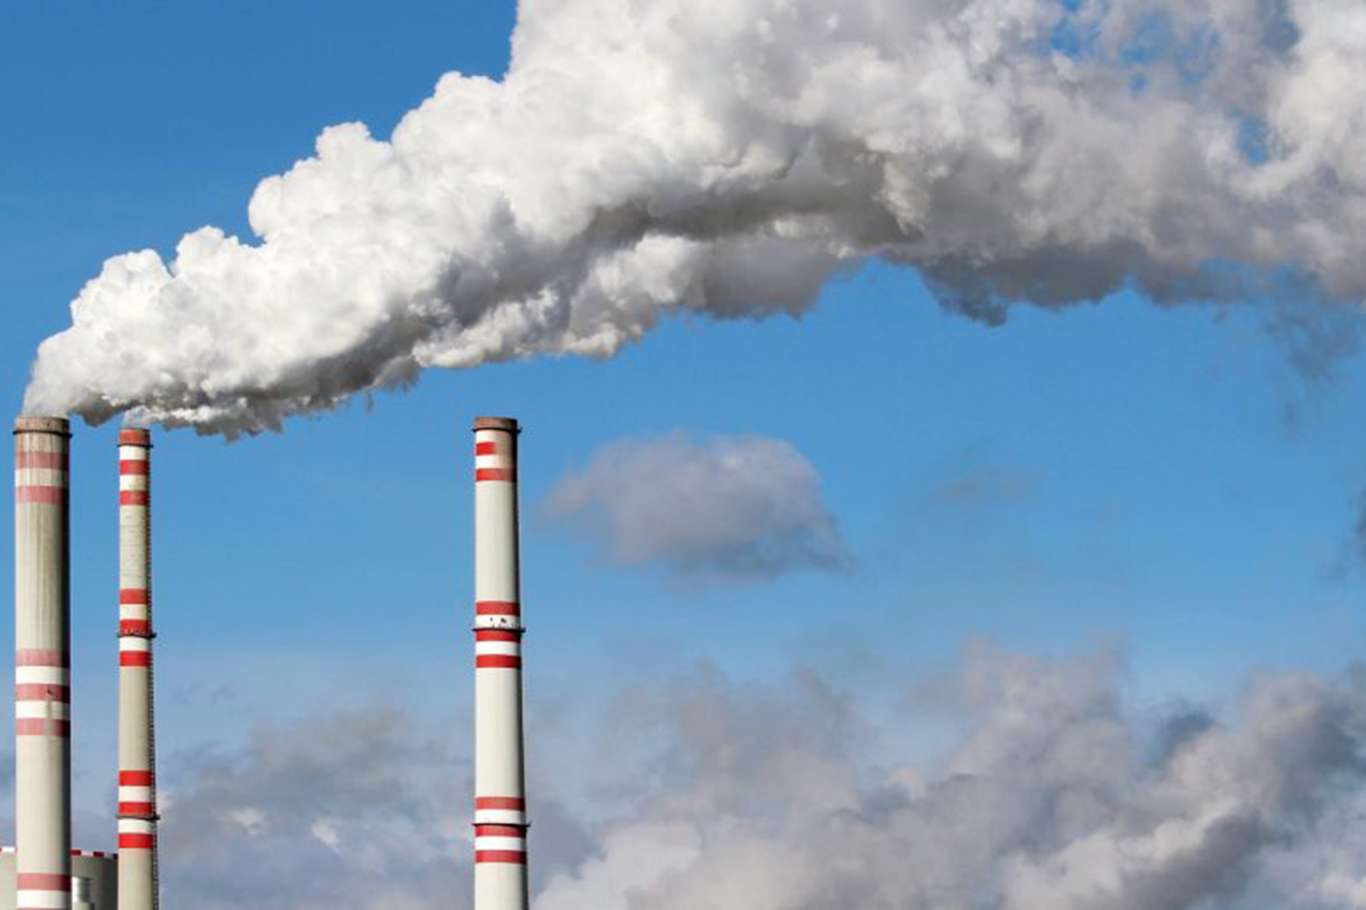 Turkey’s greenhouse emissions decrease by 3.1% in 2019